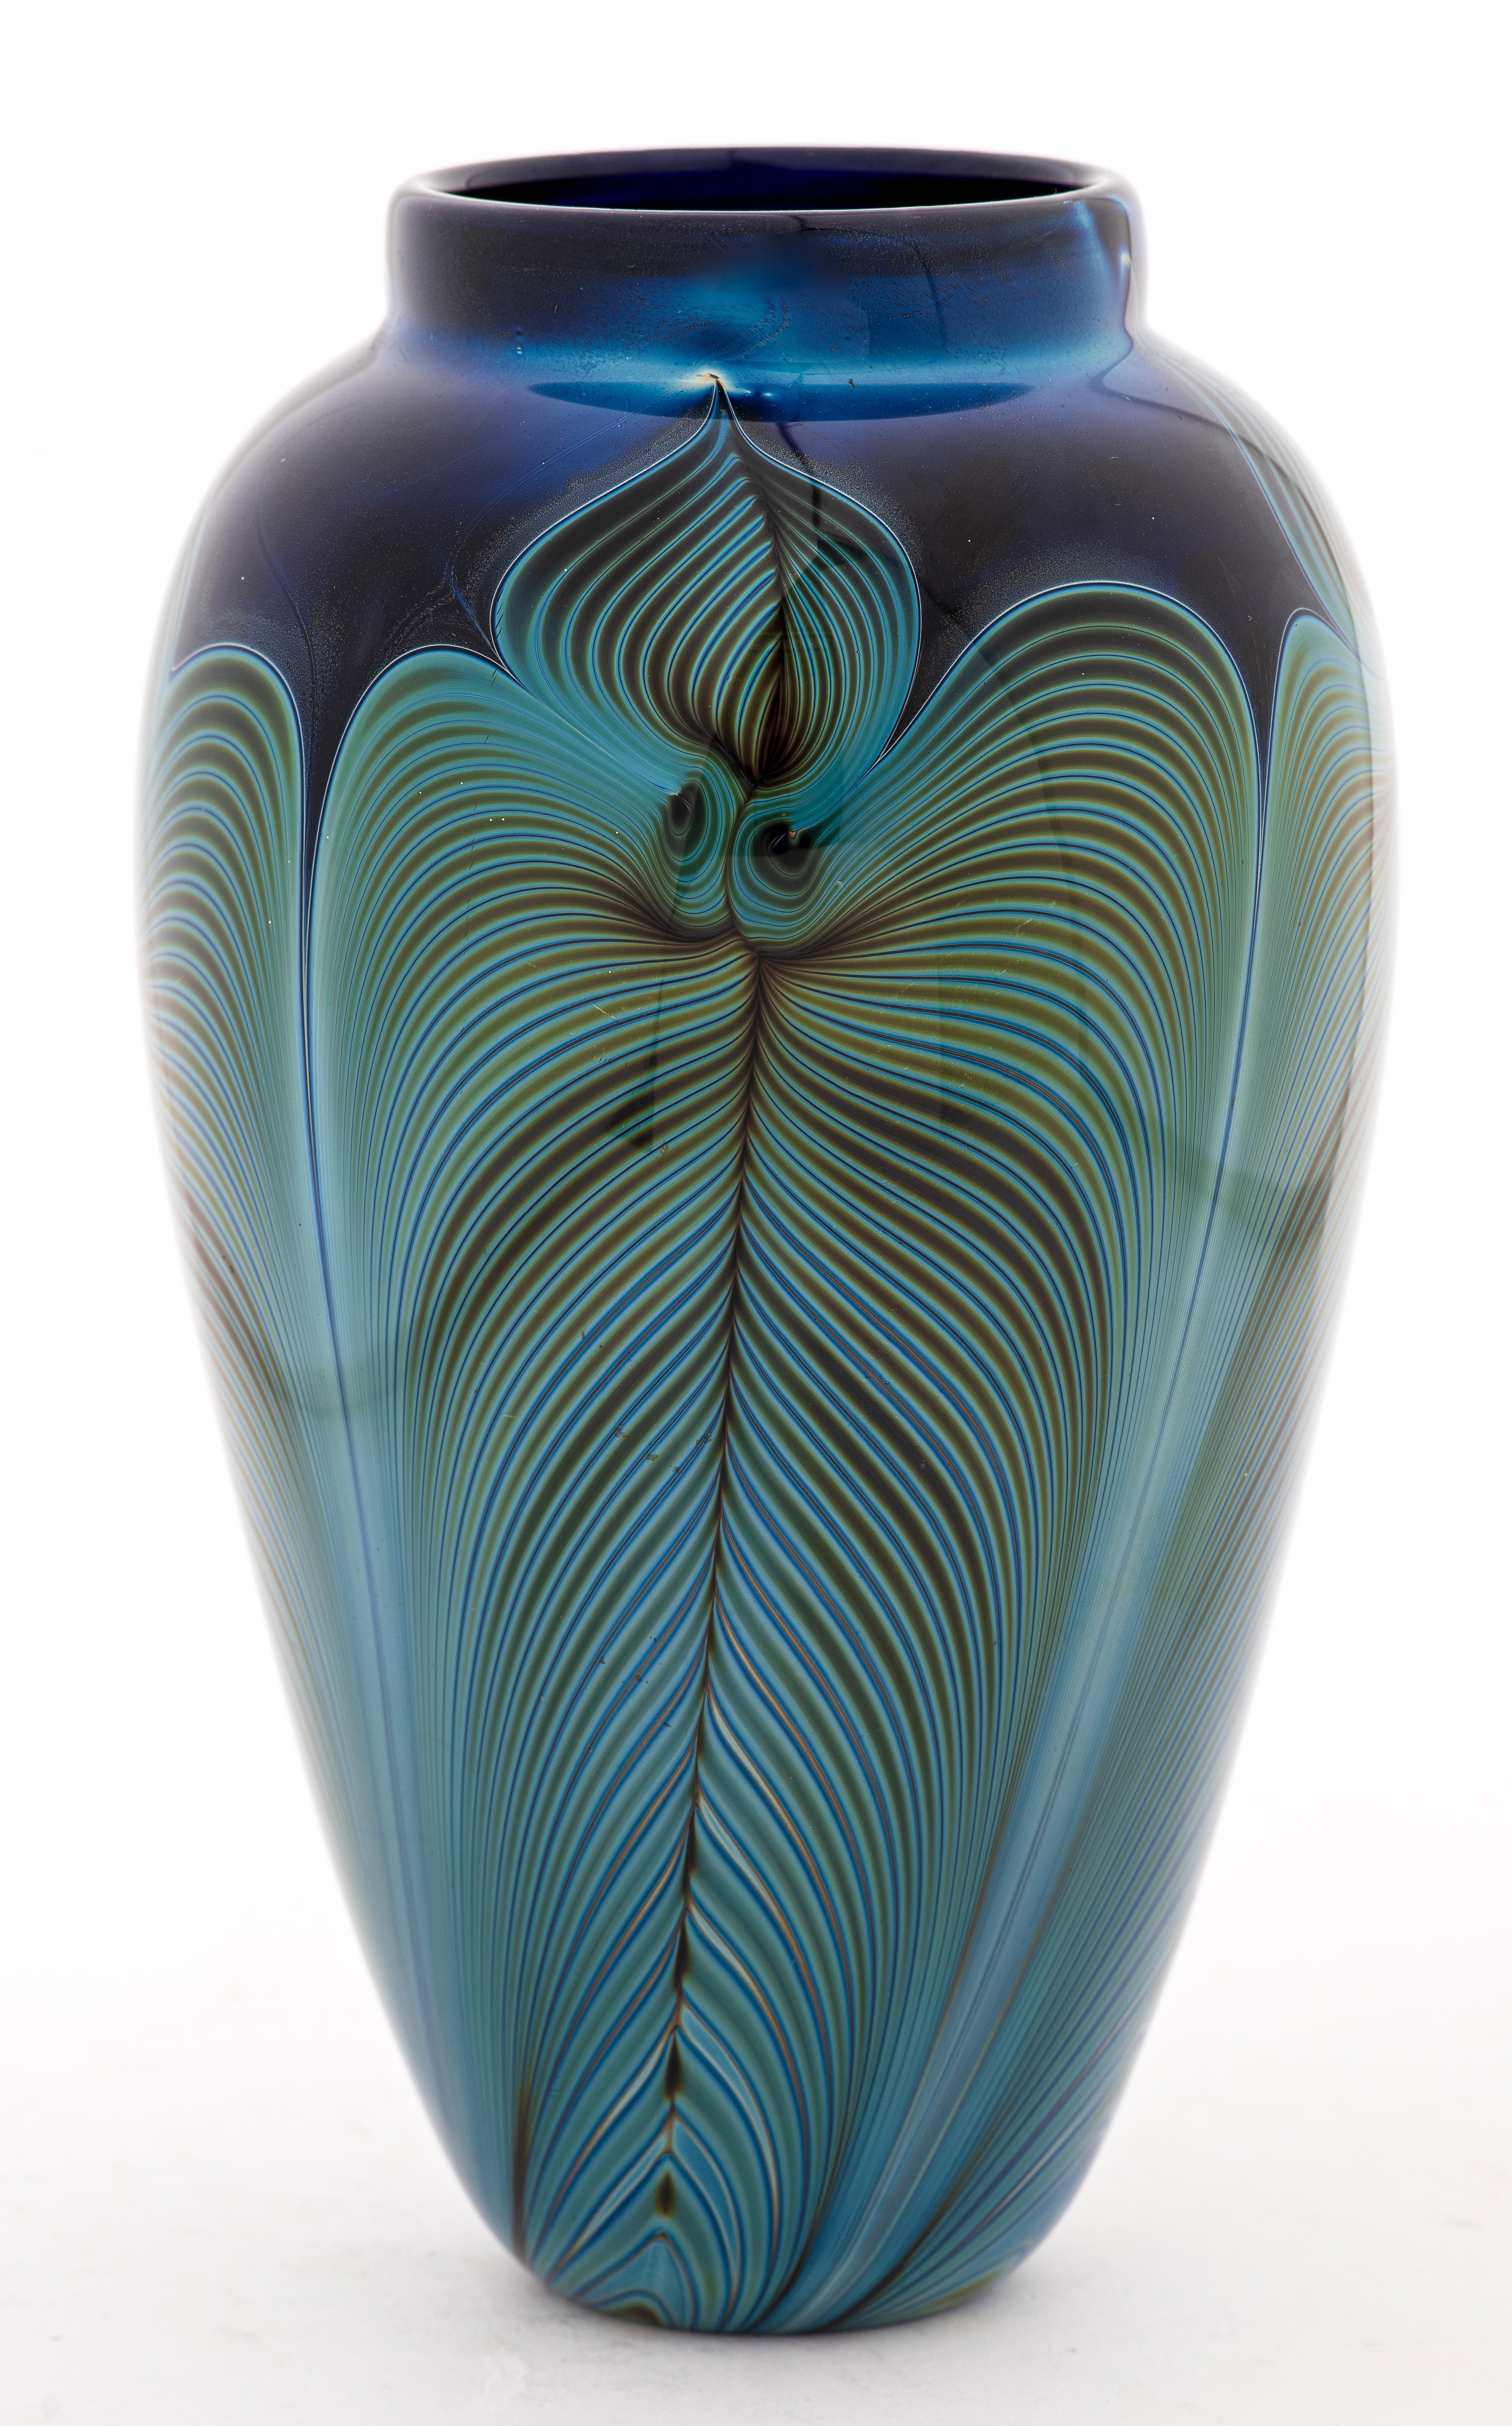 Randy strong art glass vase with feathered layered and cased glass design, incised signature on the bottom. 8.75